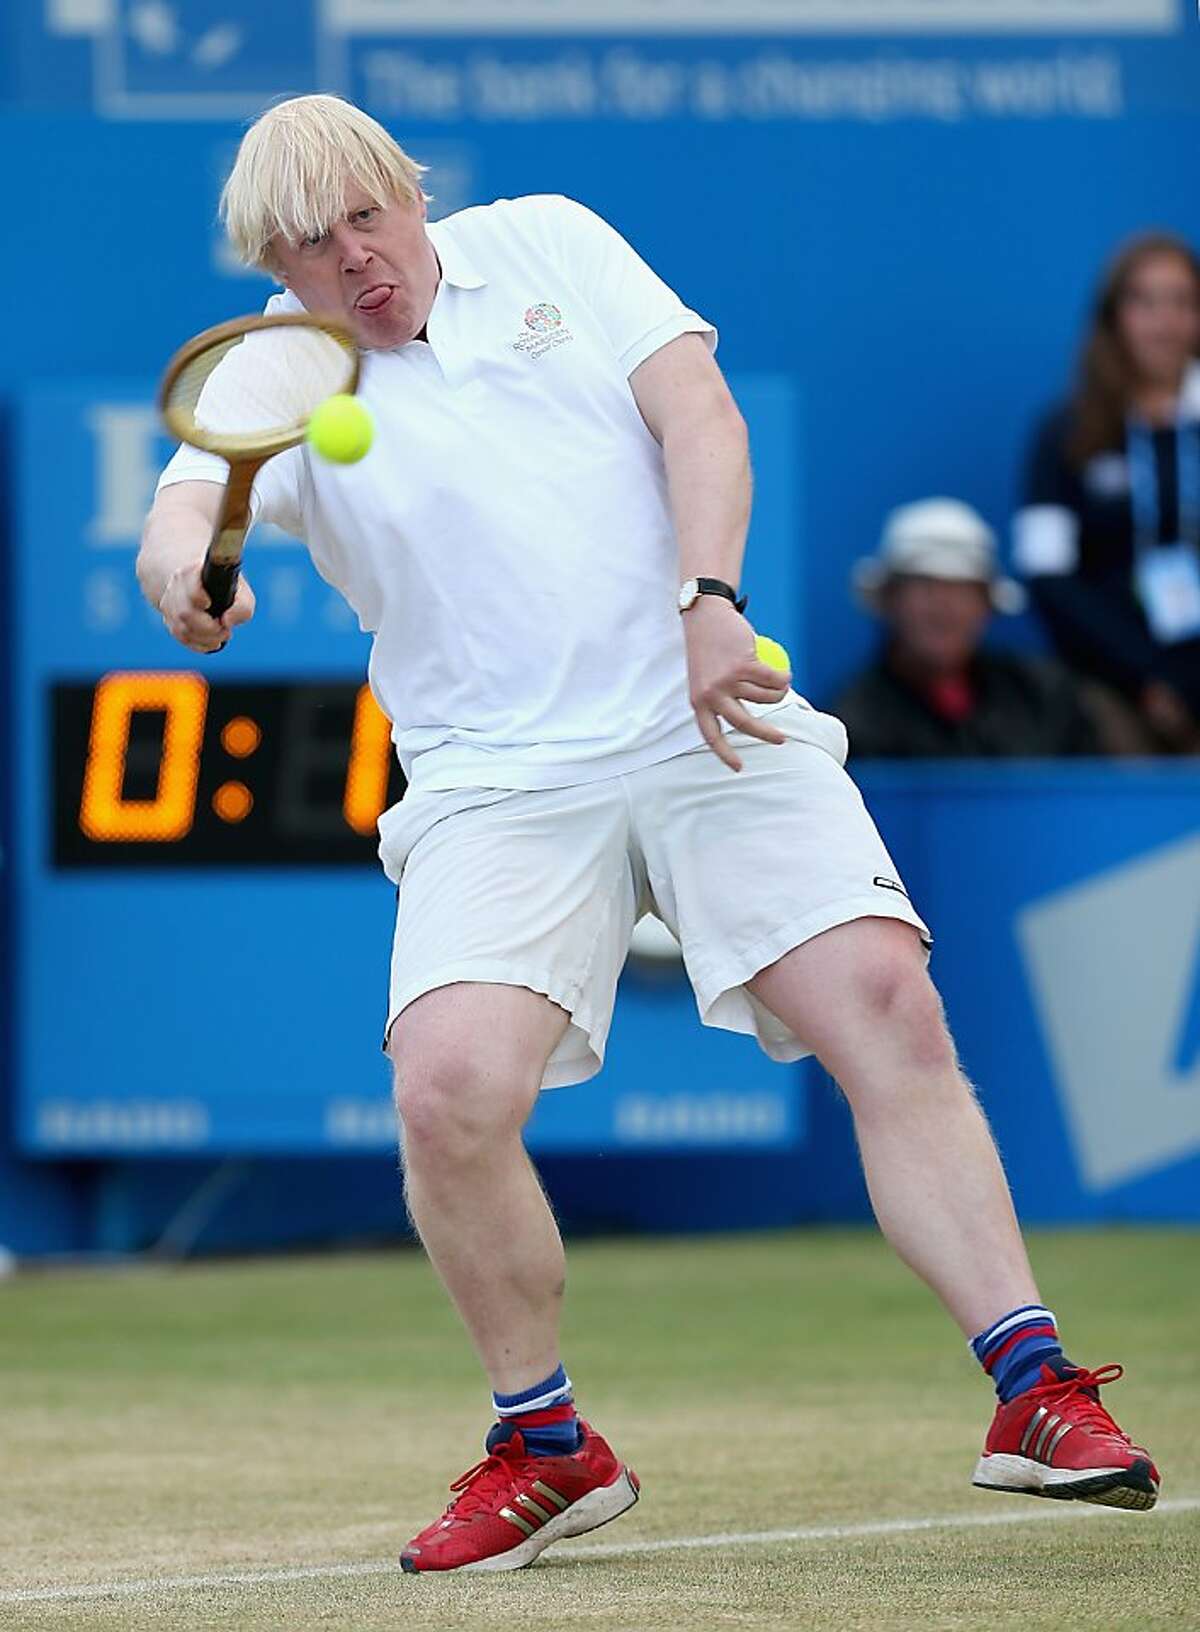 Even if you're the mayor of one of the world's greatest cities (London), you probably shouldn't step on the court if you play tennis like this. (Mayor Boris Johnson during a charity match at the AEGON Championships in London.)